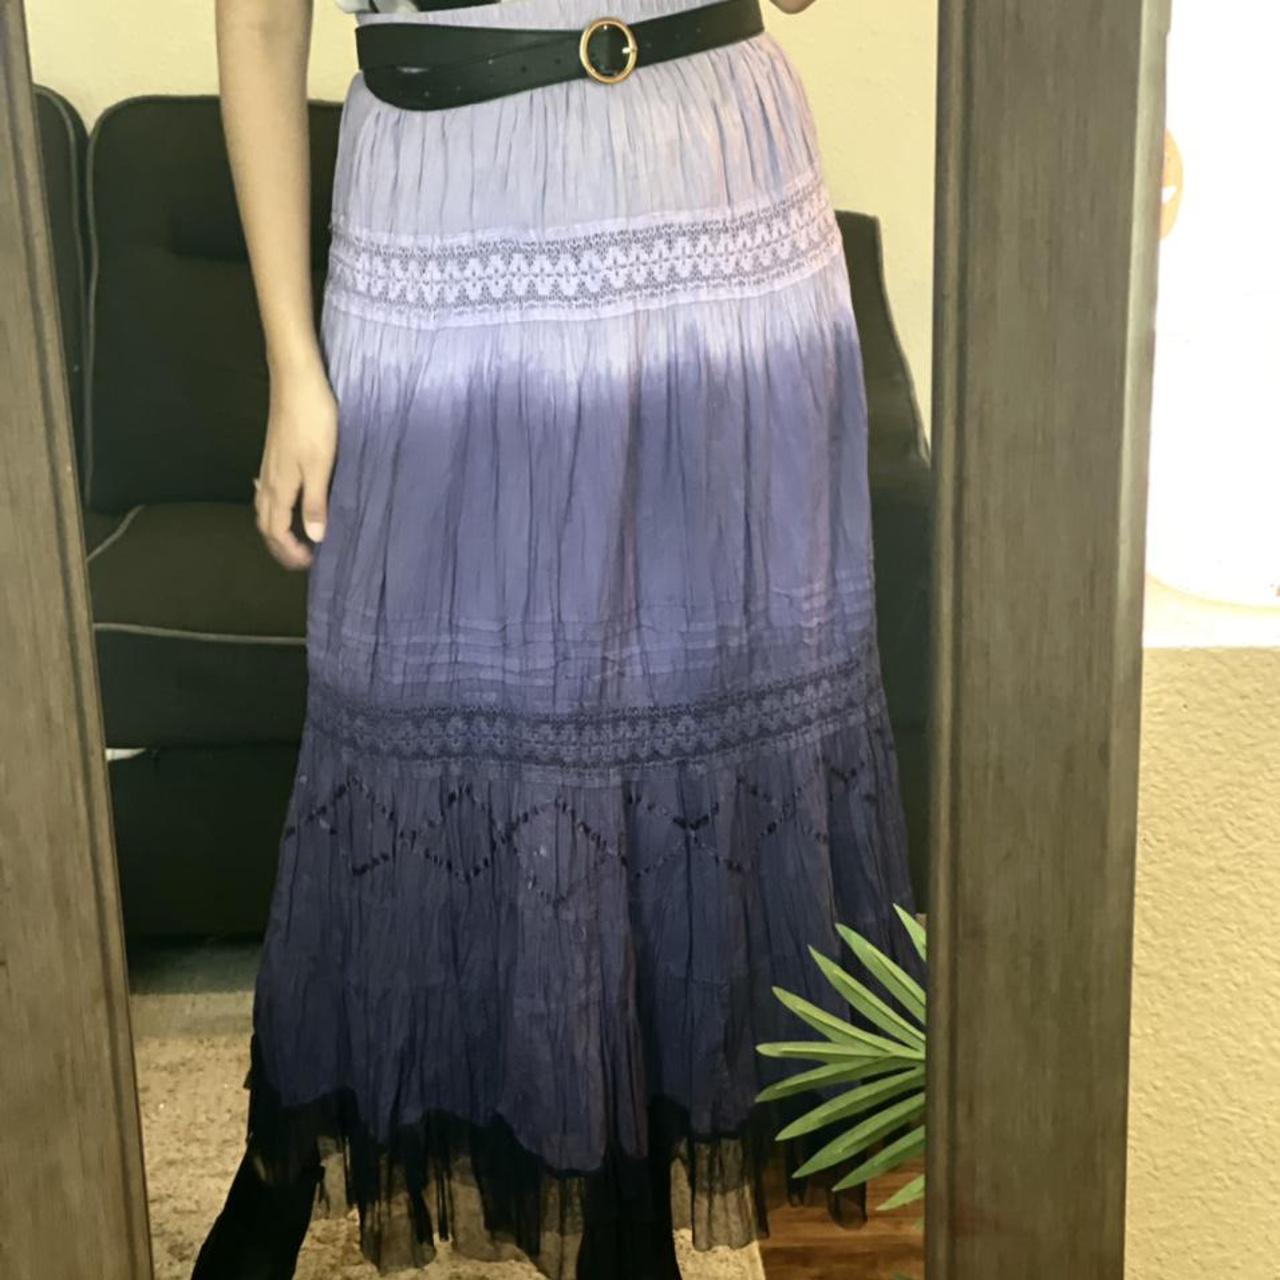 Product Image 1 - Fairy core maxi skirt ✨🦋

Adorable